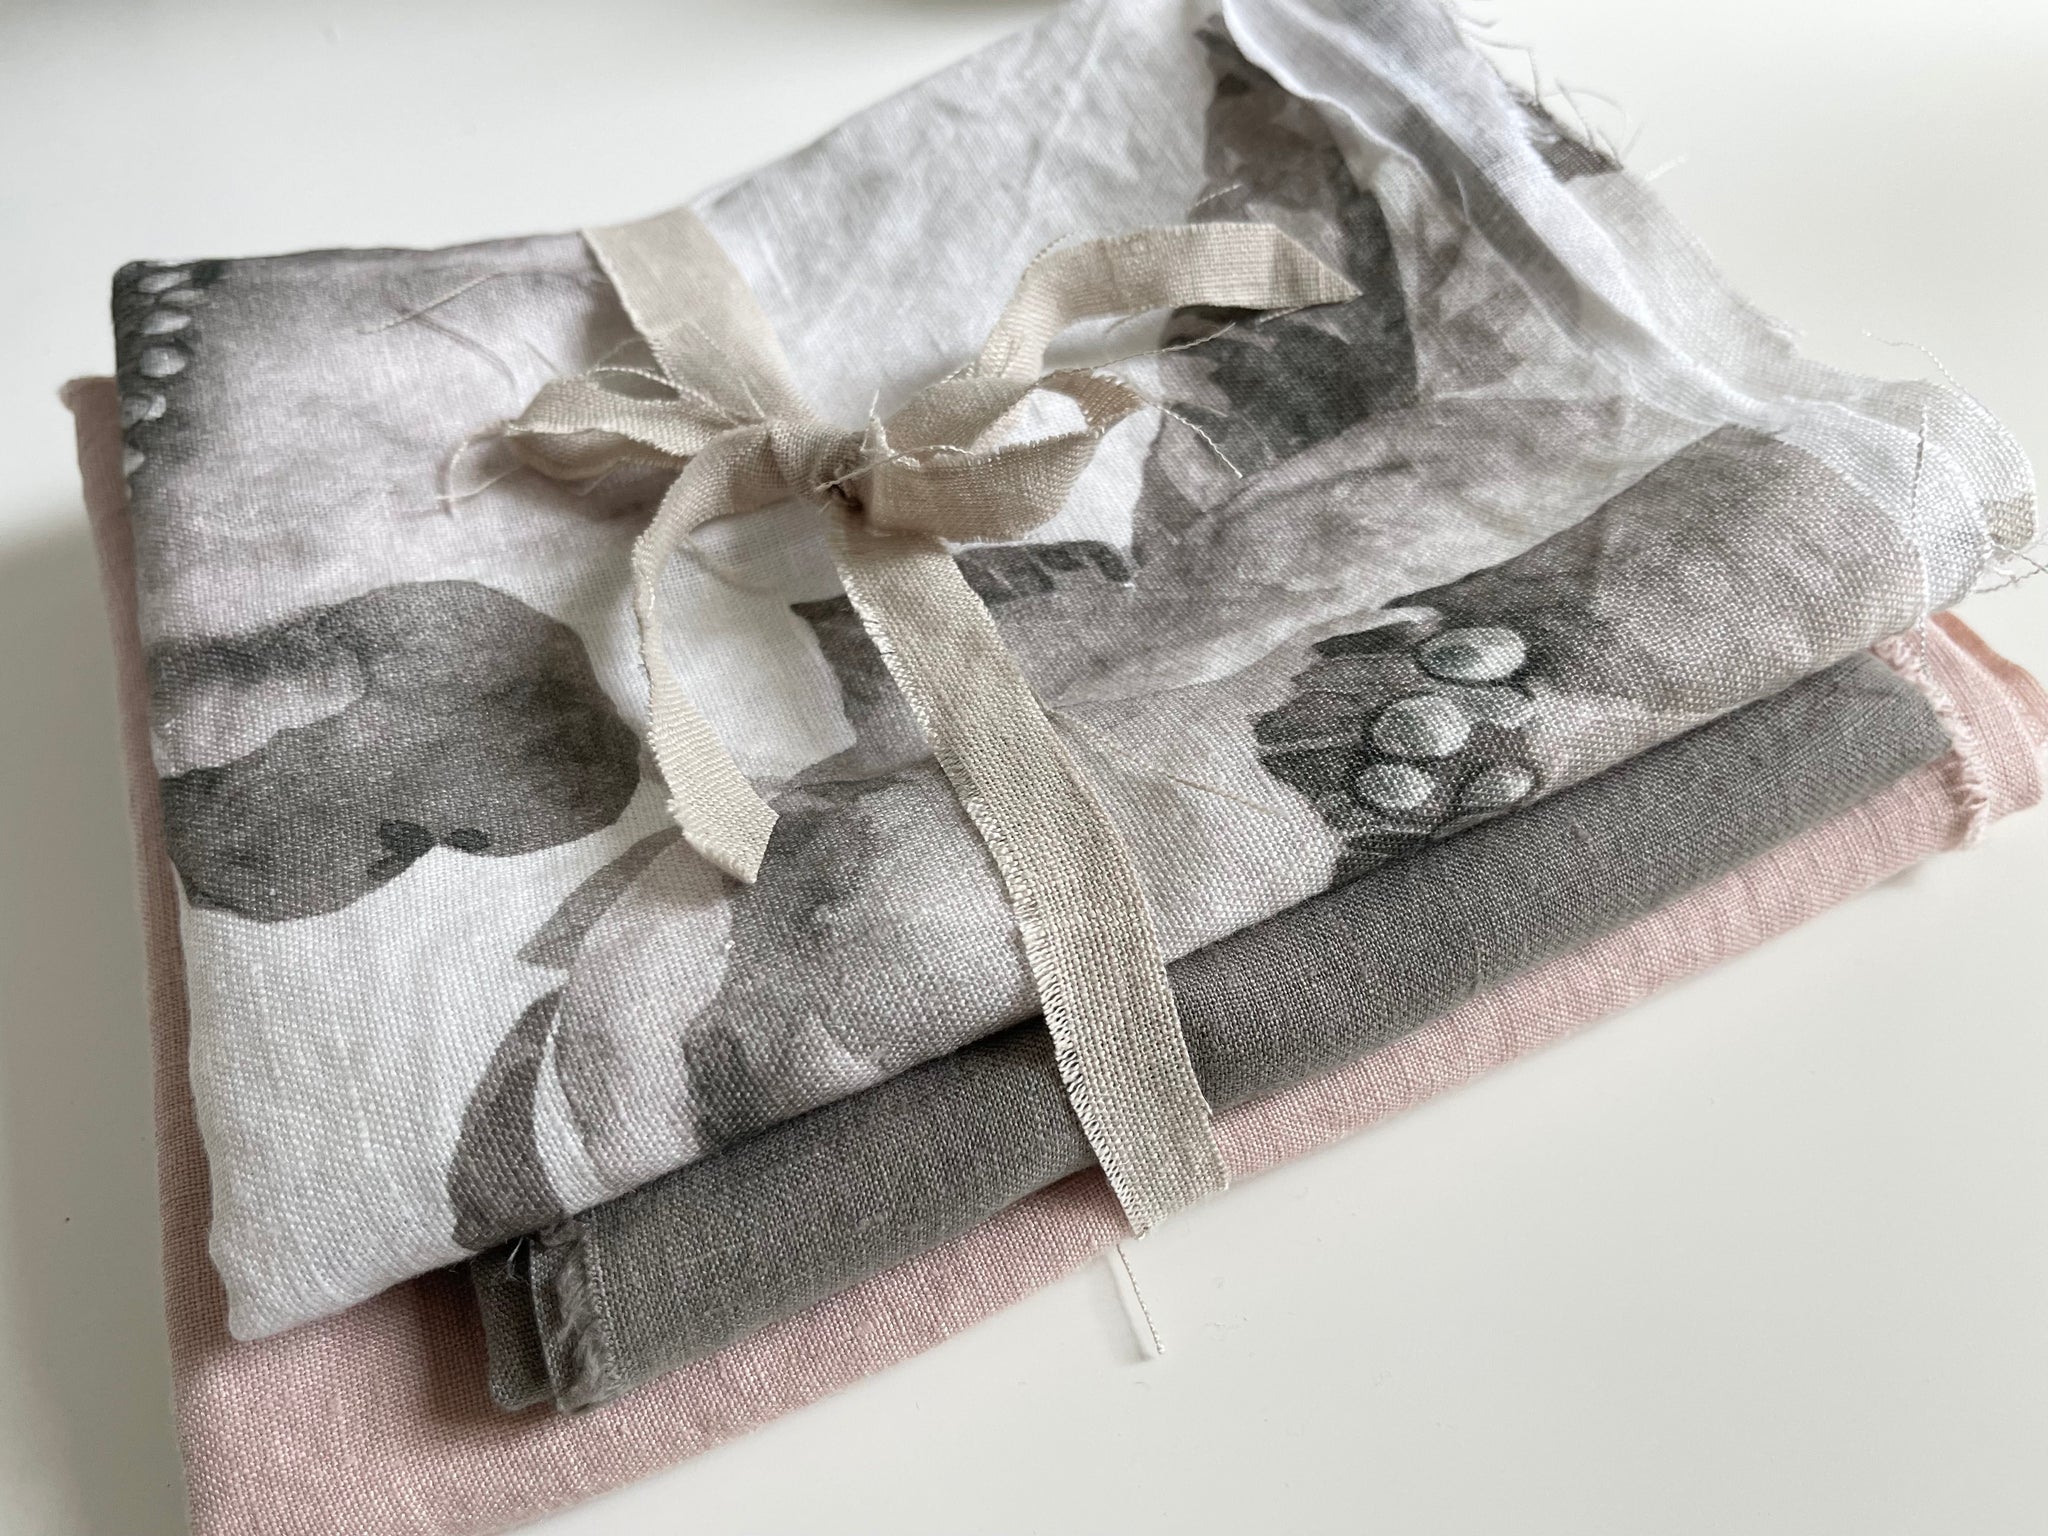 Linen Fabric Remnants - Peonies, Dusty Rose and Steeple Gray